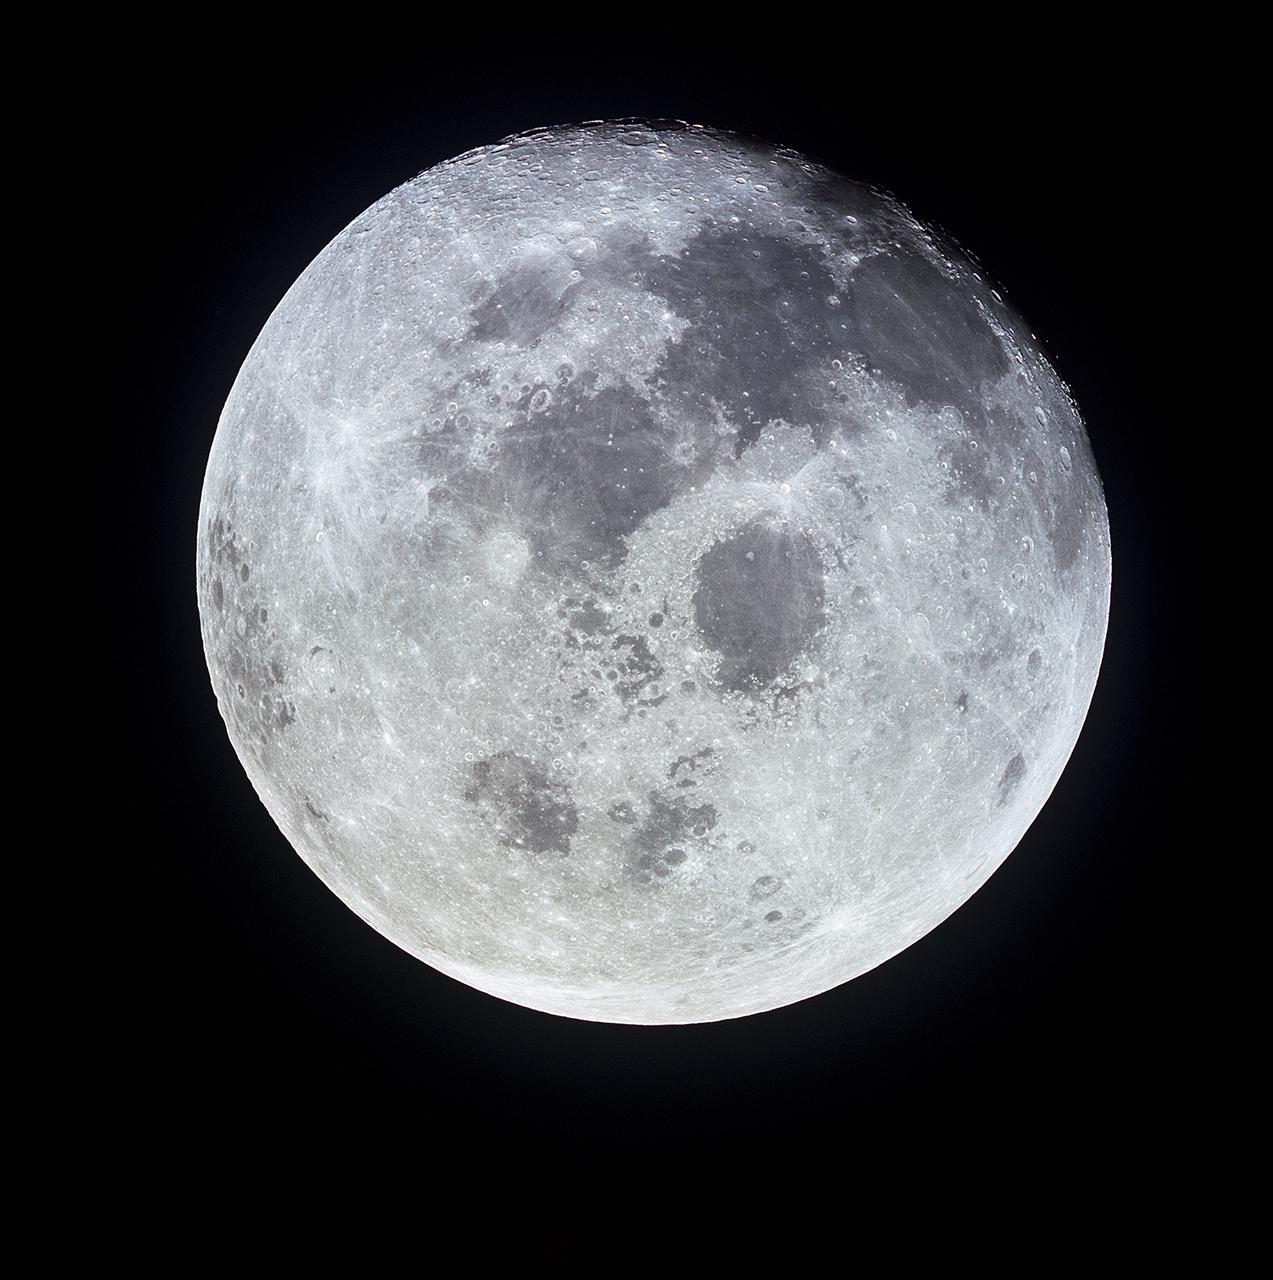 View of a full Moon photographed from the Apollo 11 spacecraft on 21 July 1969, one day after the Moon landing. Photo by NASA